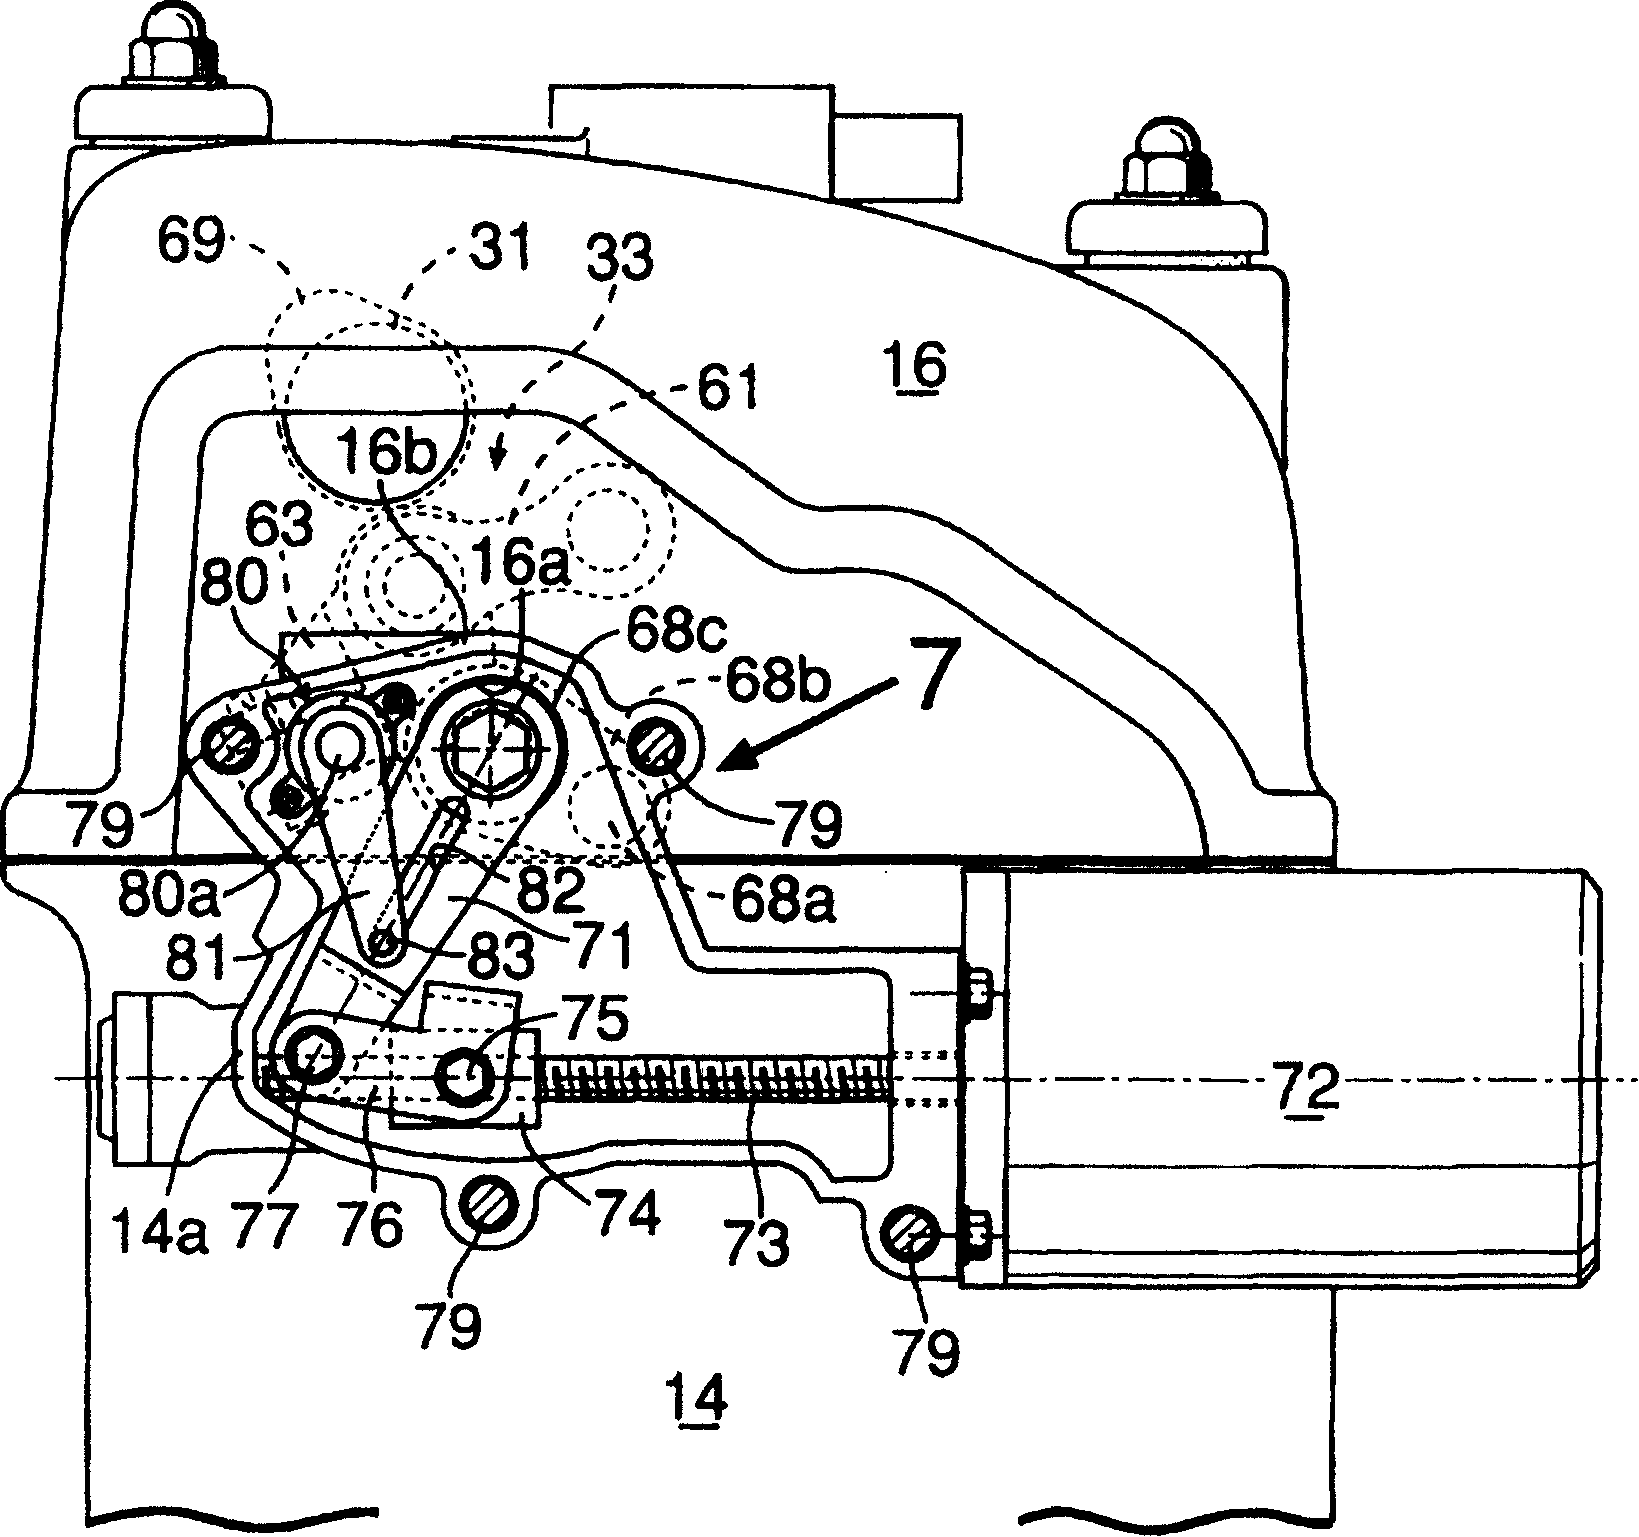 Valve operating device for engine